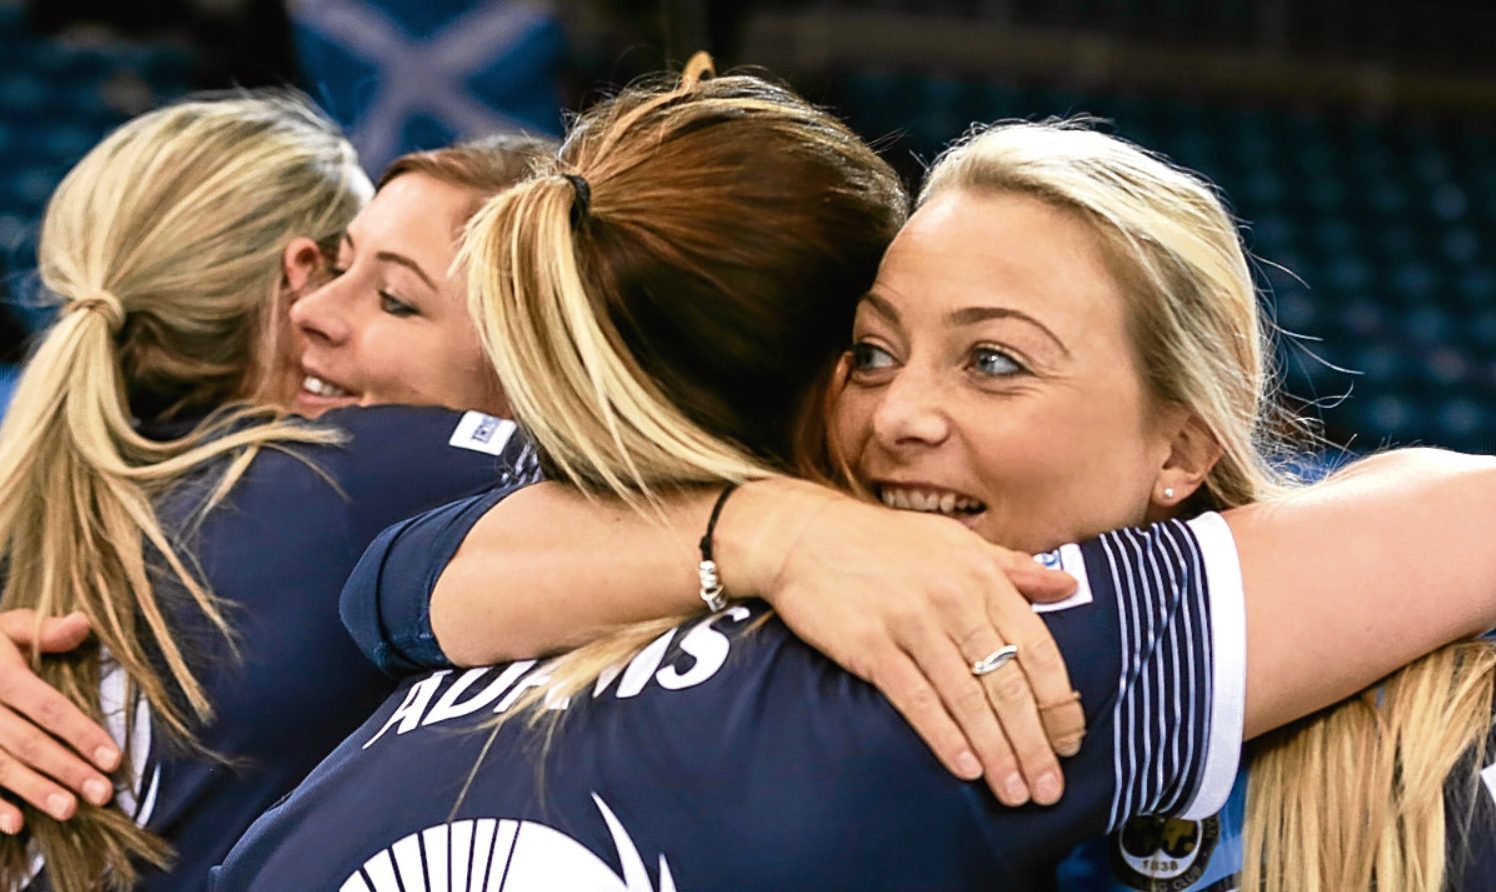 The Scotland women celebrate their victory over Sweden.